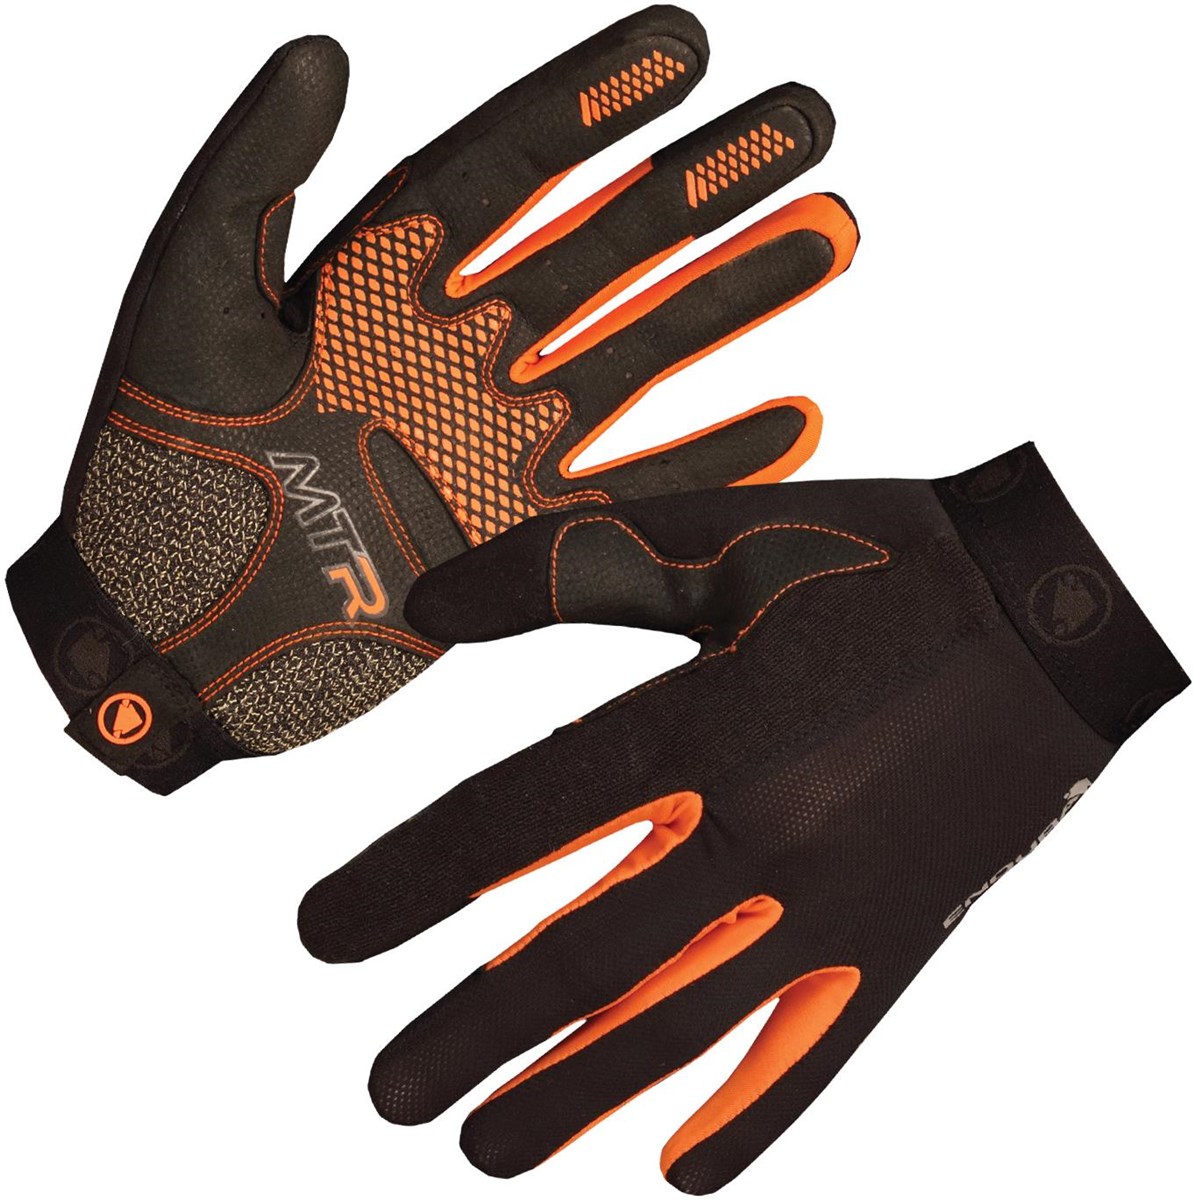 Endura MTR Full Finger Cycling Gloves product image